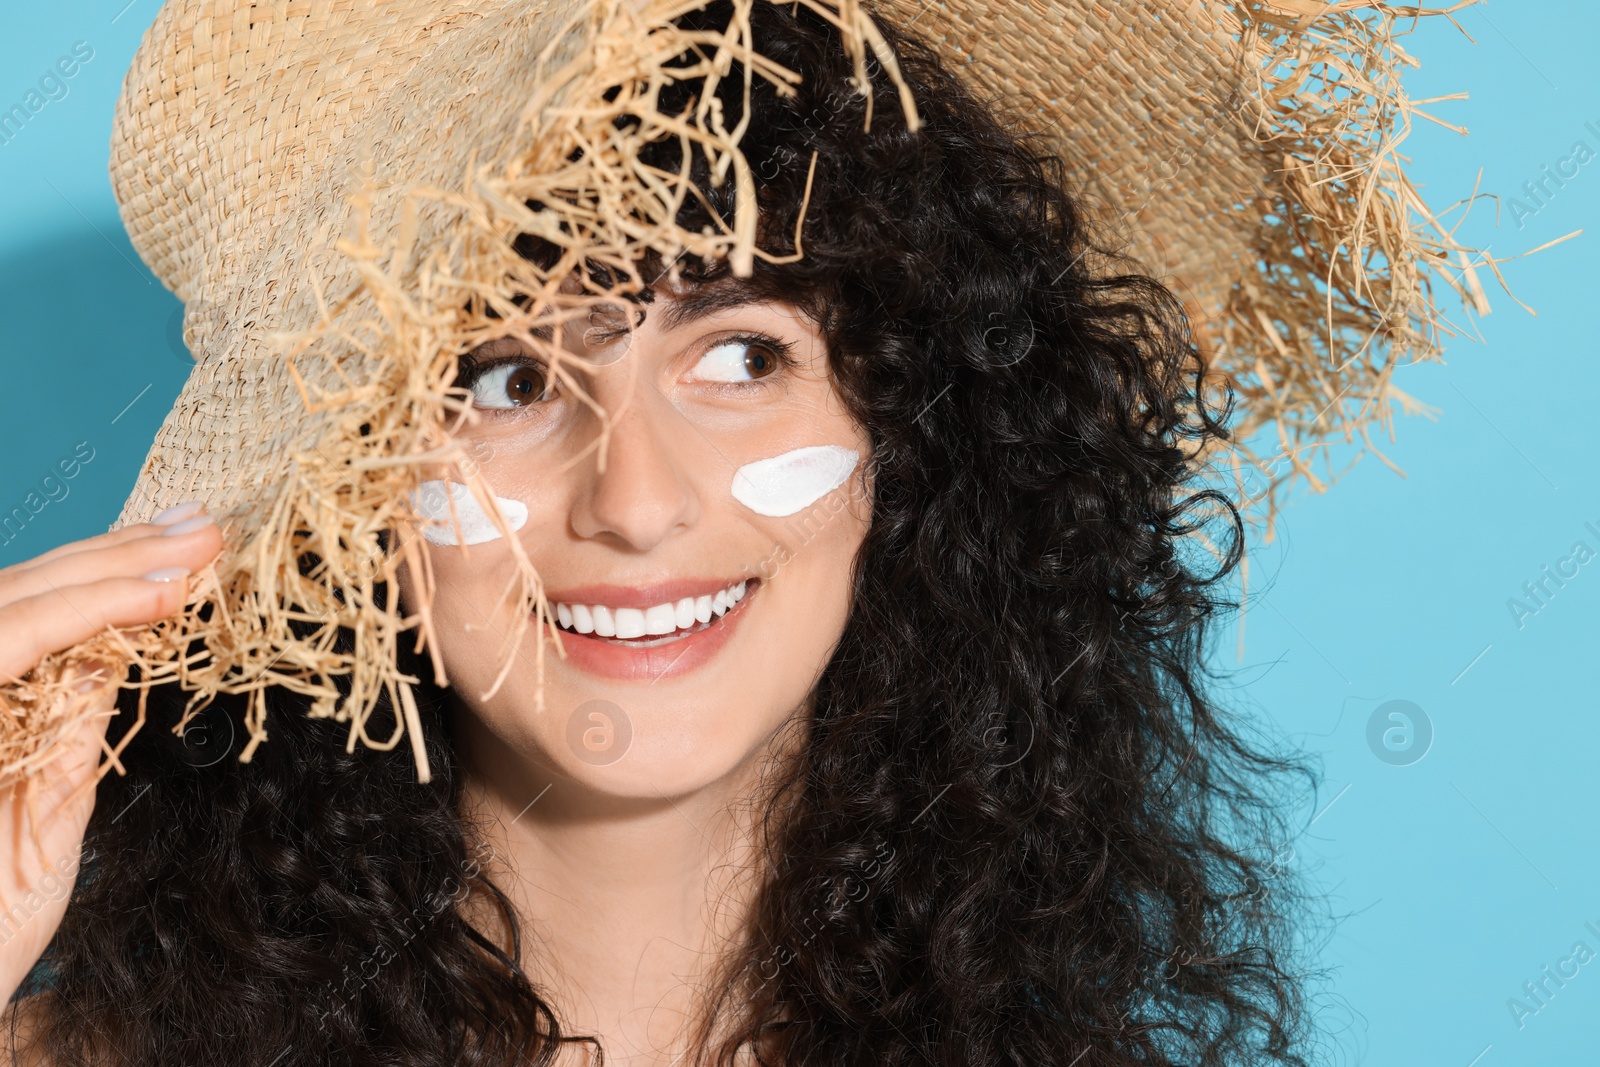 Photo of Beautiful young woman in straw hat with sun protection cream on her face against light blue background